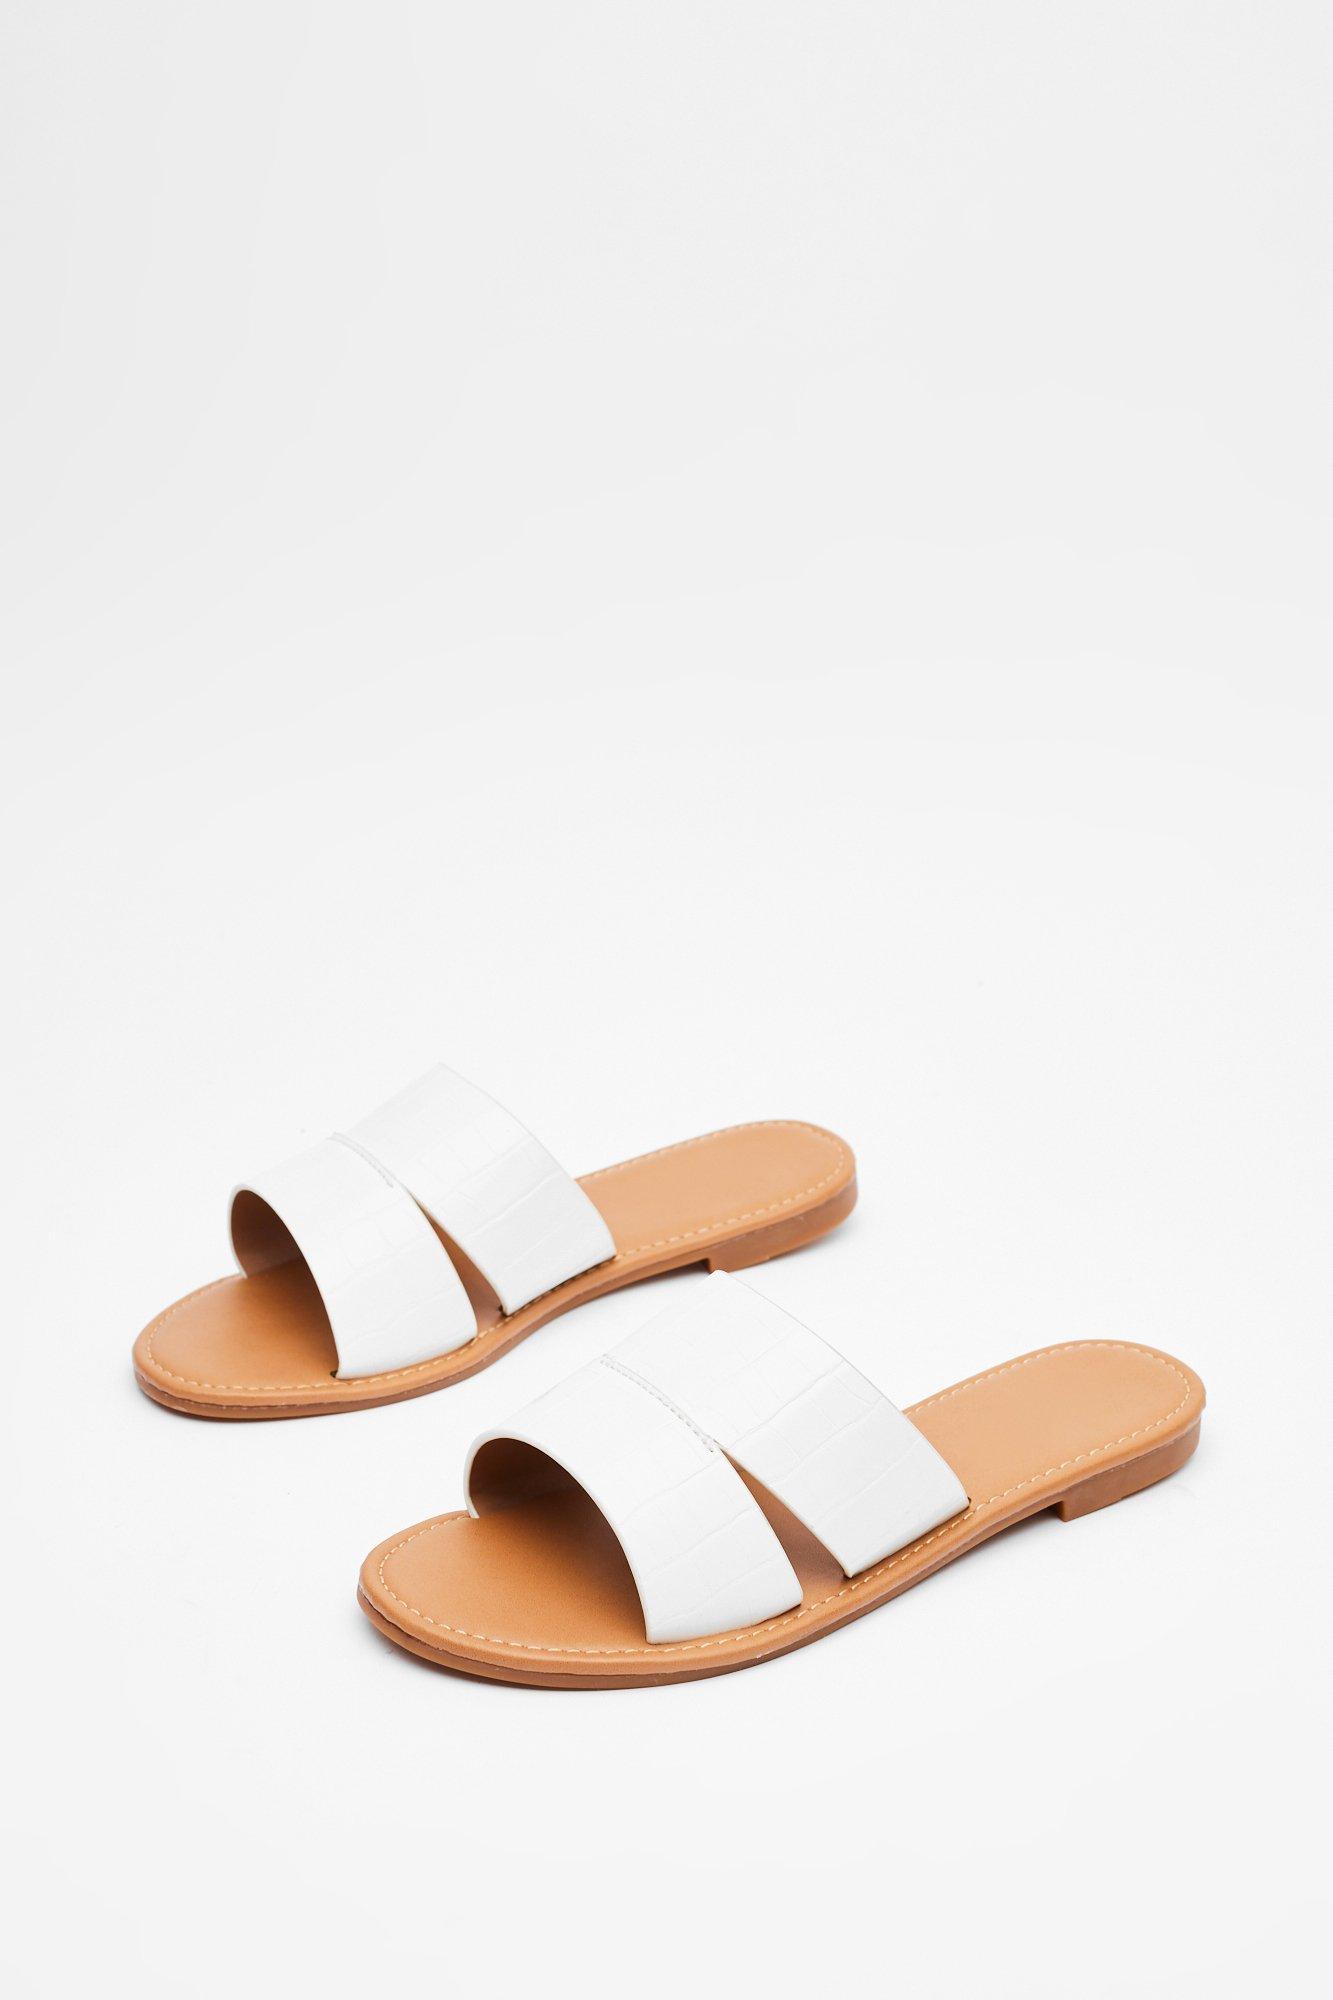 Mules Shoes | Mule Sandals & Heeled Mules | Nasty Gal